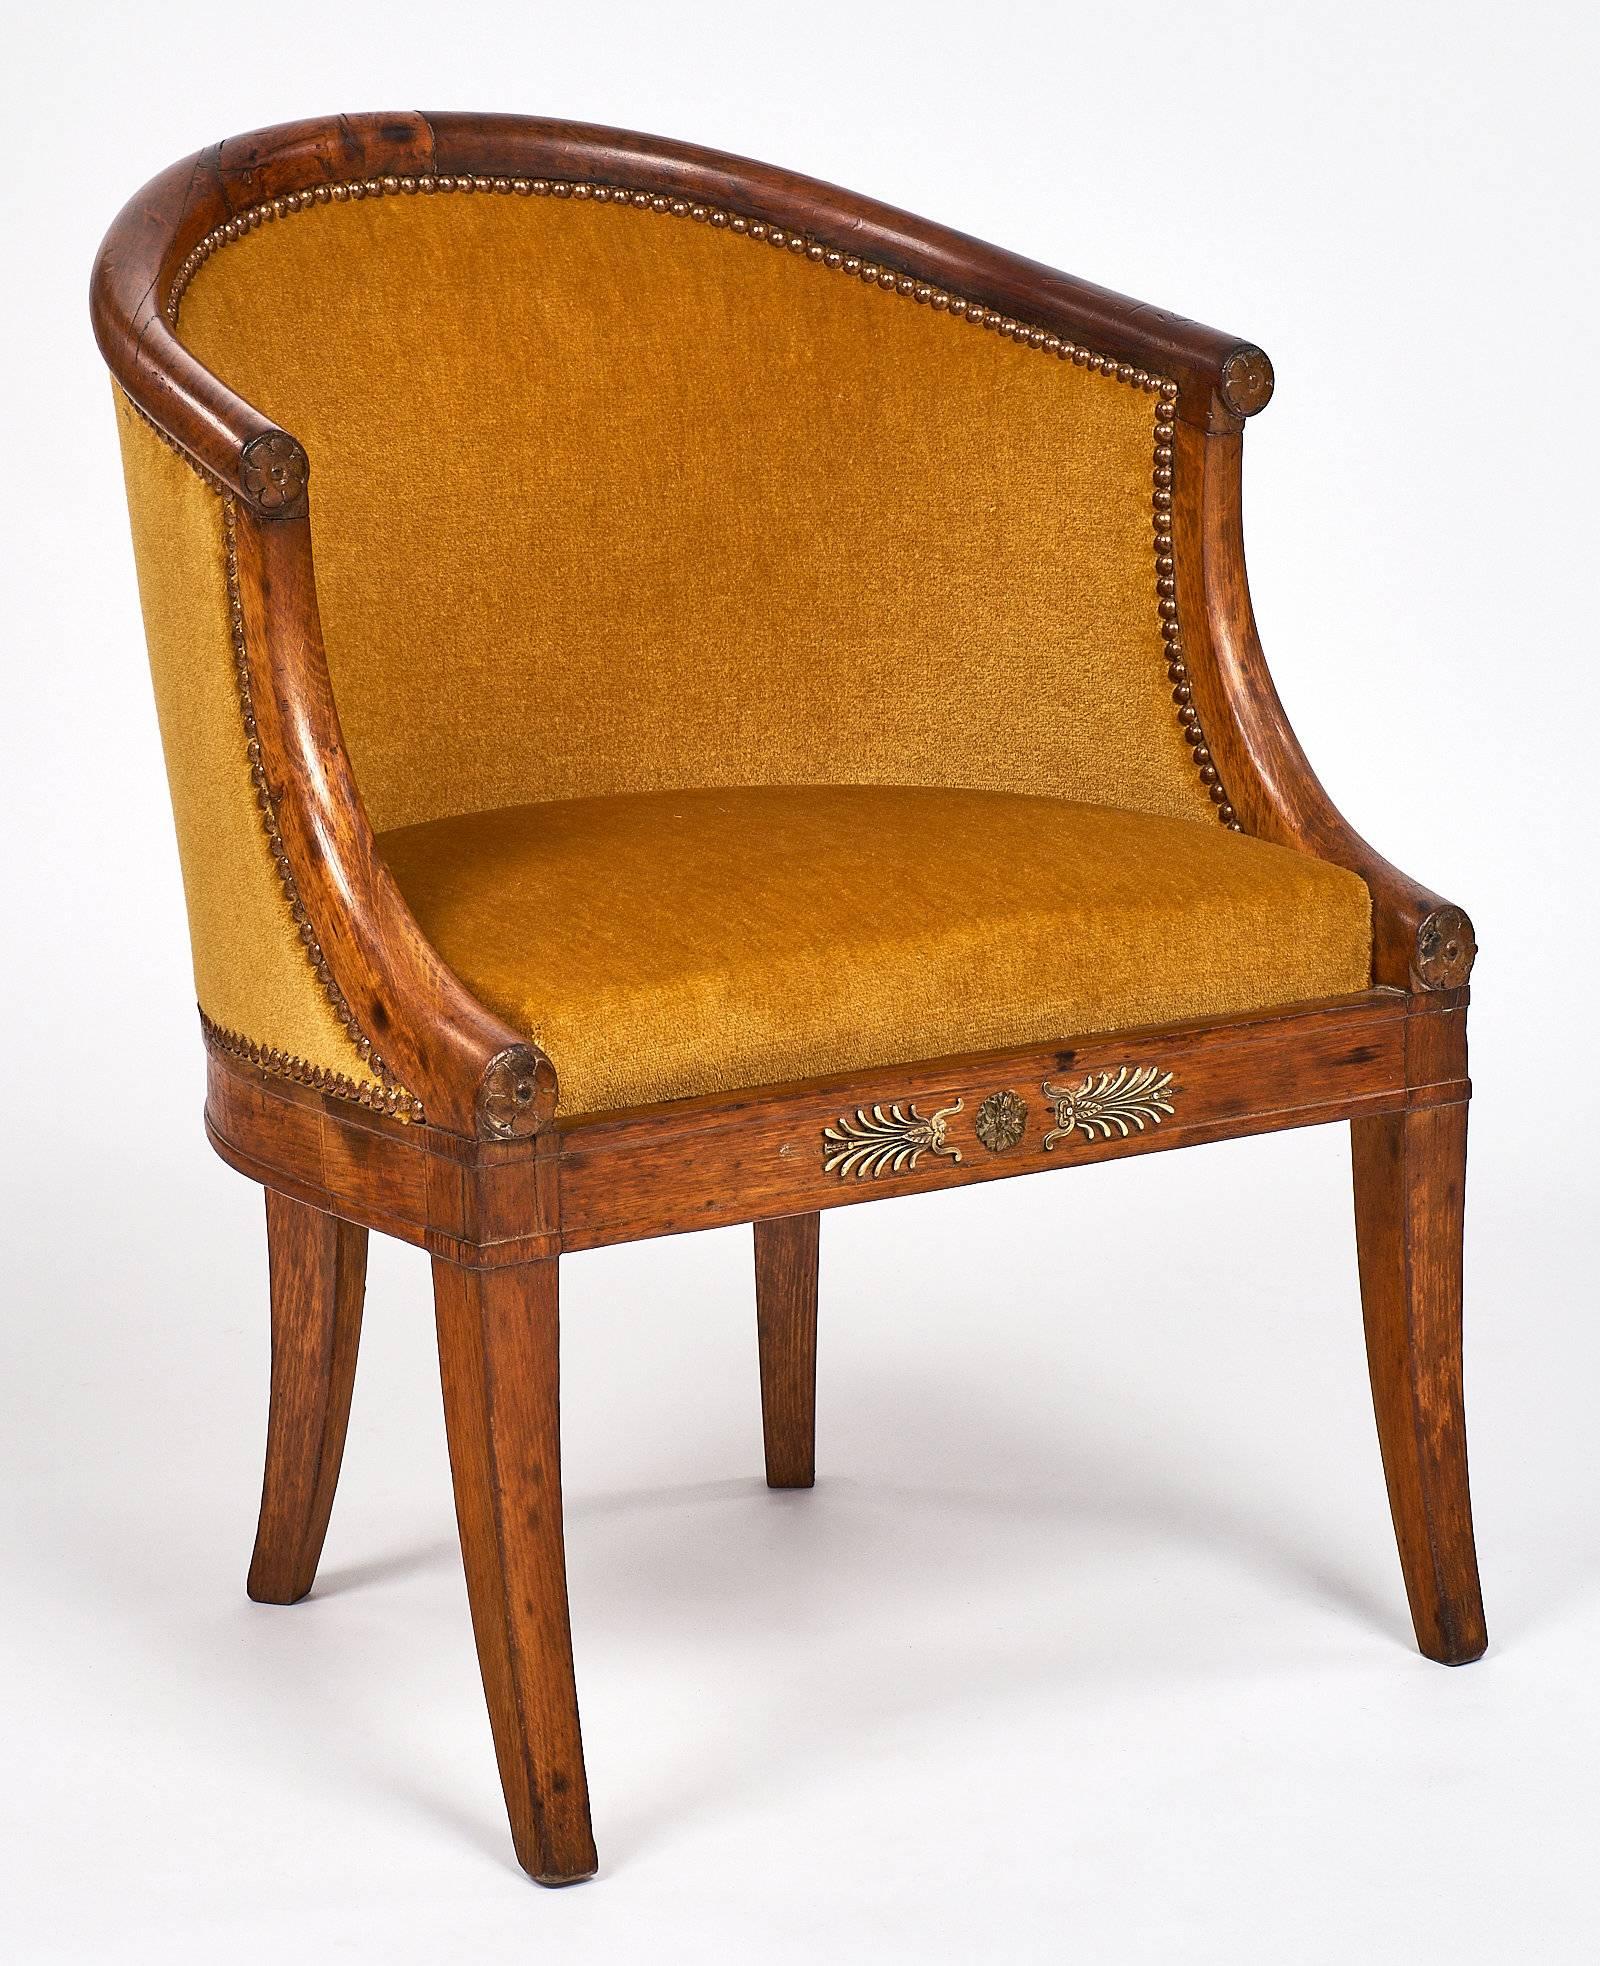 Early 19th century French antique set of chairs with the original golden colored velvet upholstery. This set of four has the beautiful curved barrel backs that started in the Charles X period. The wood frames are finished with a French polish for